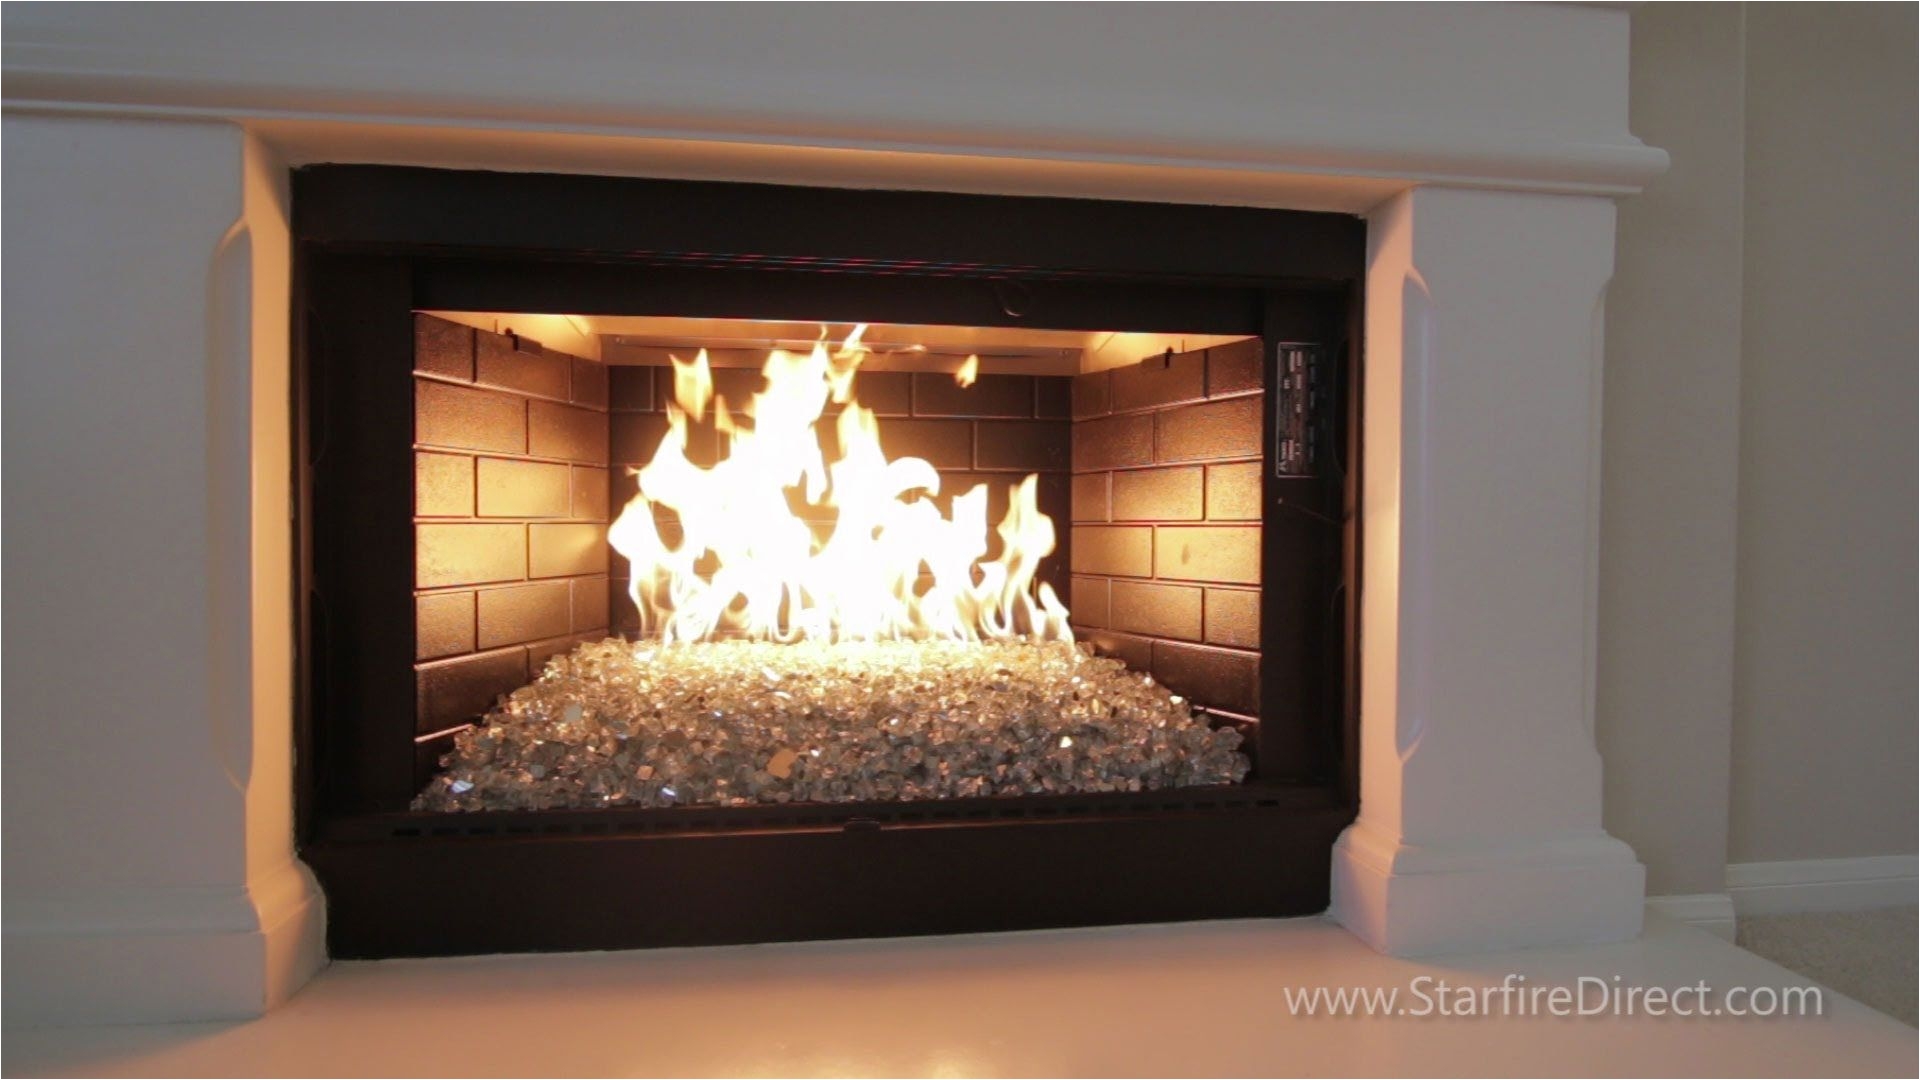 looking for a great way to spruce up your gas burning fireplace a h burner and fire glass purchased from www starfiredirect com will do the trick